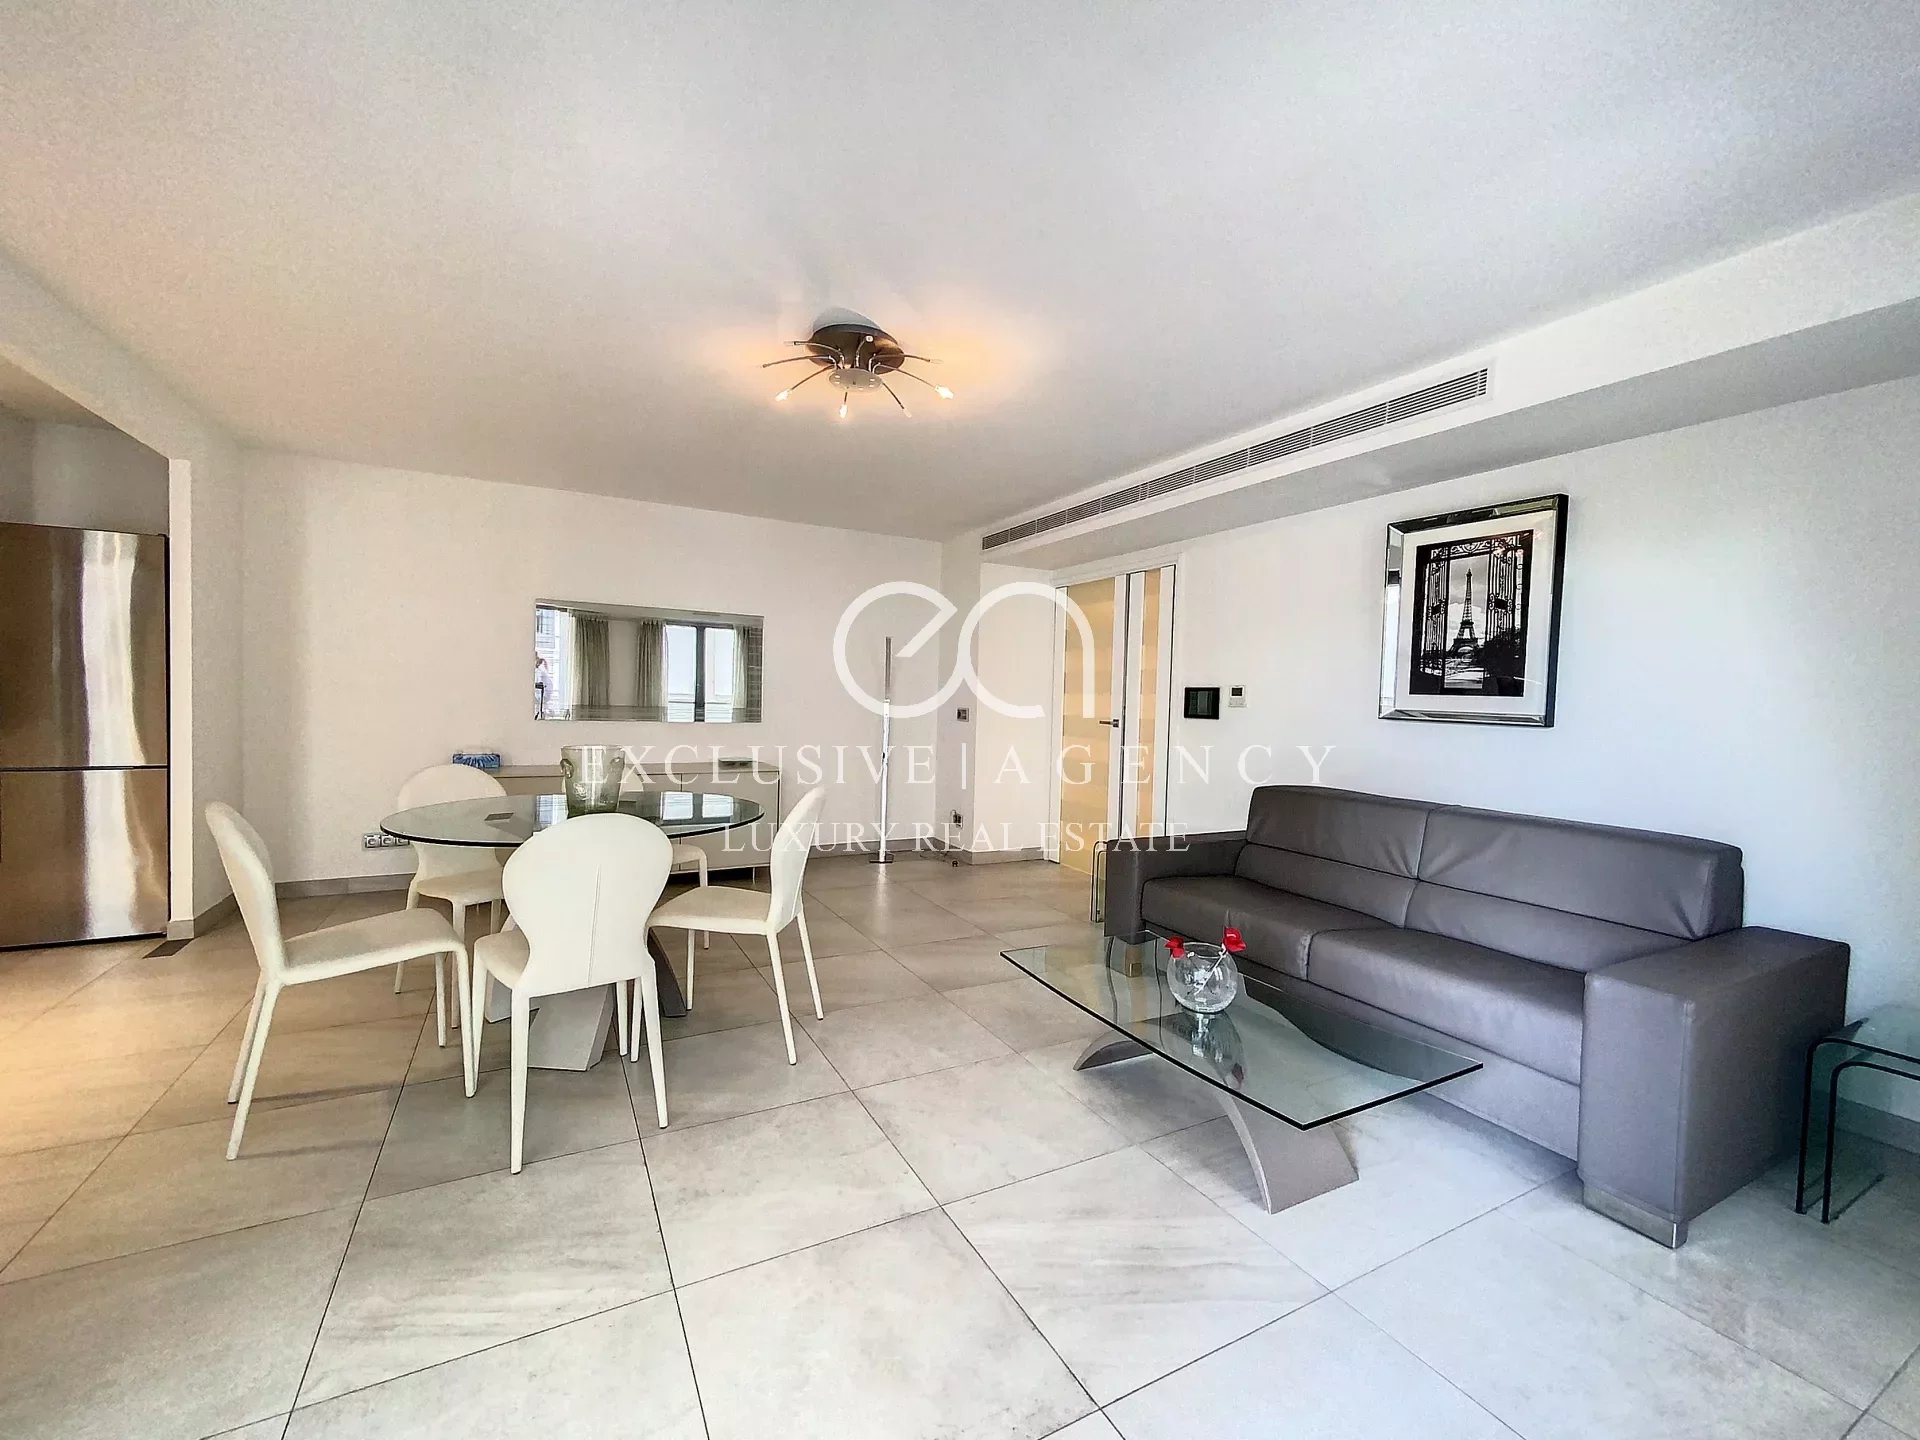 Cannes Croisette rental 70sqm 2 bedrooms apartment with terrace